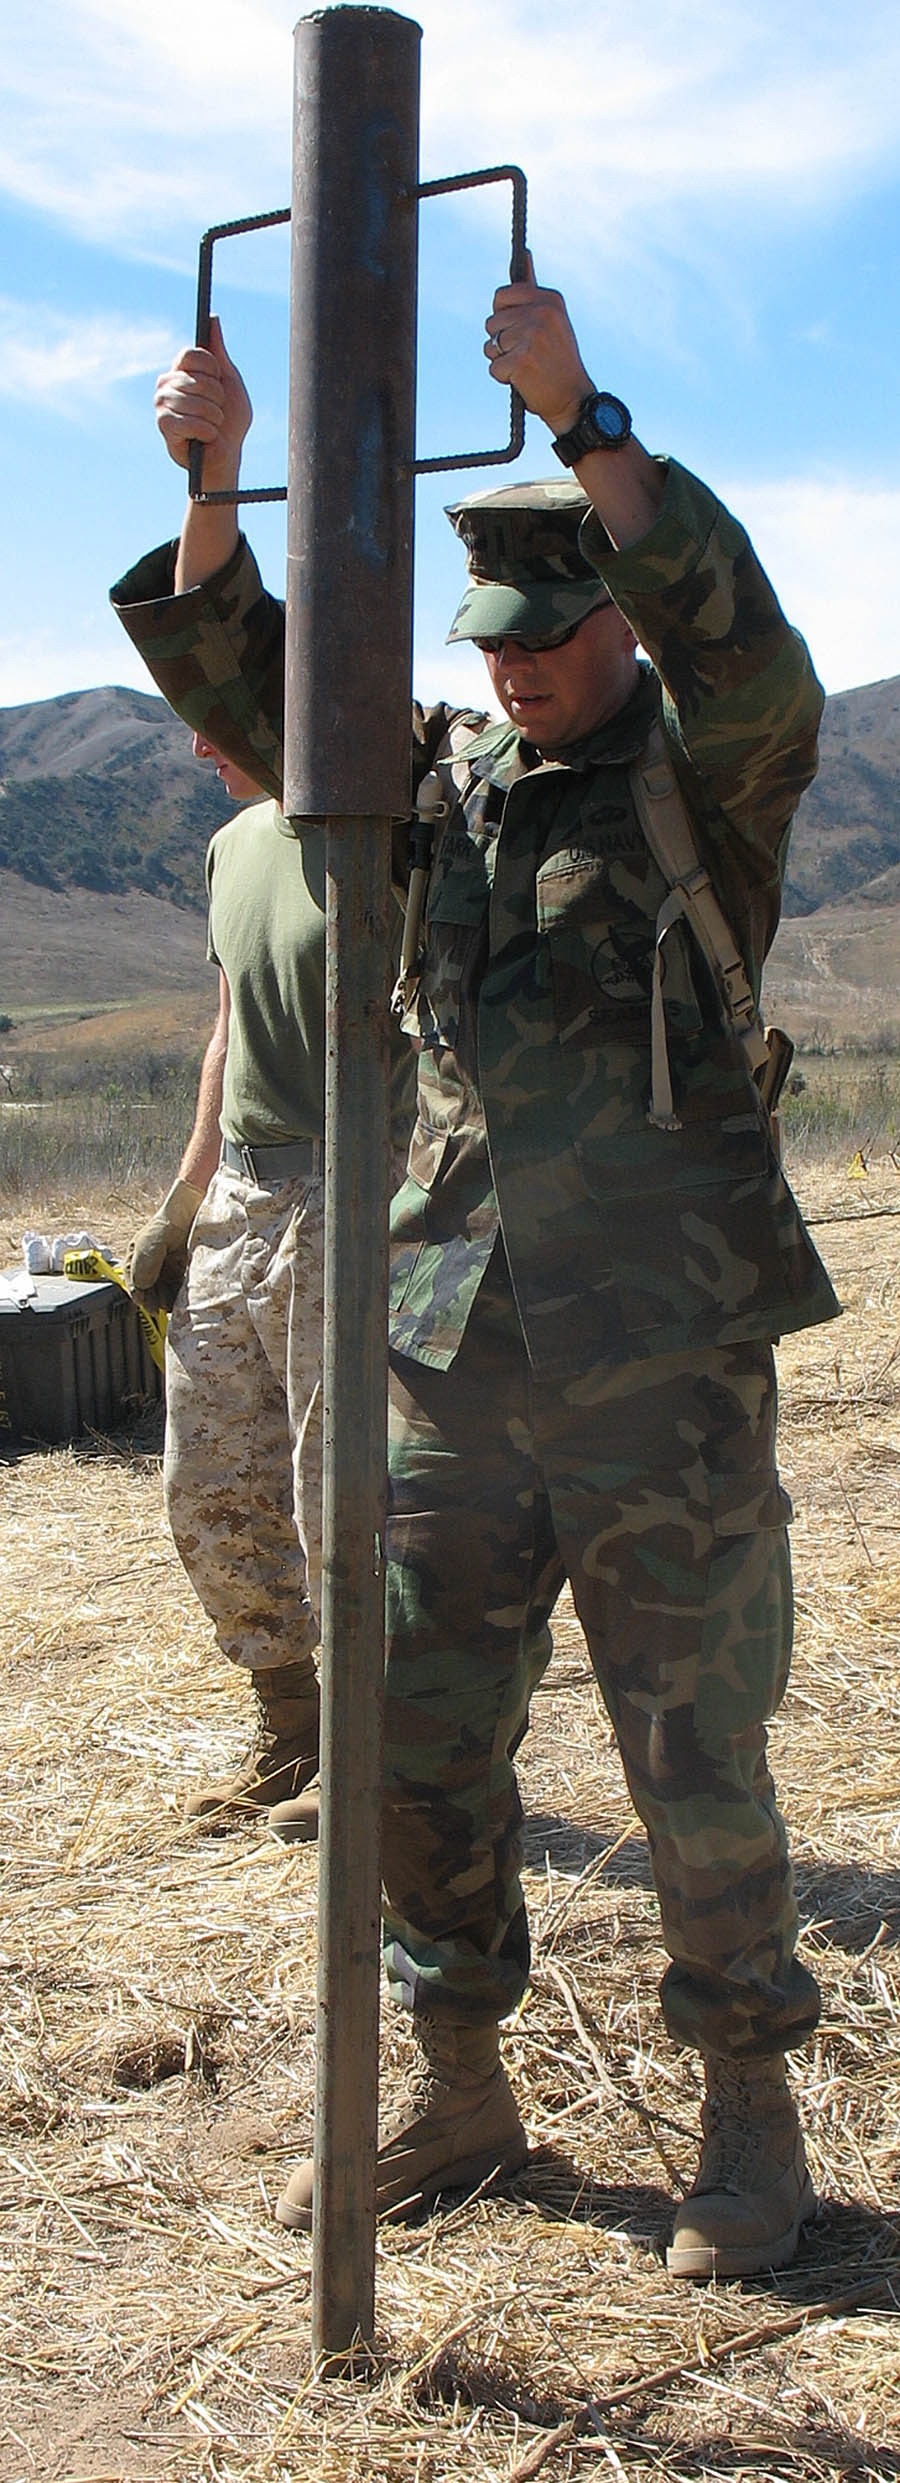 Field exercise preps